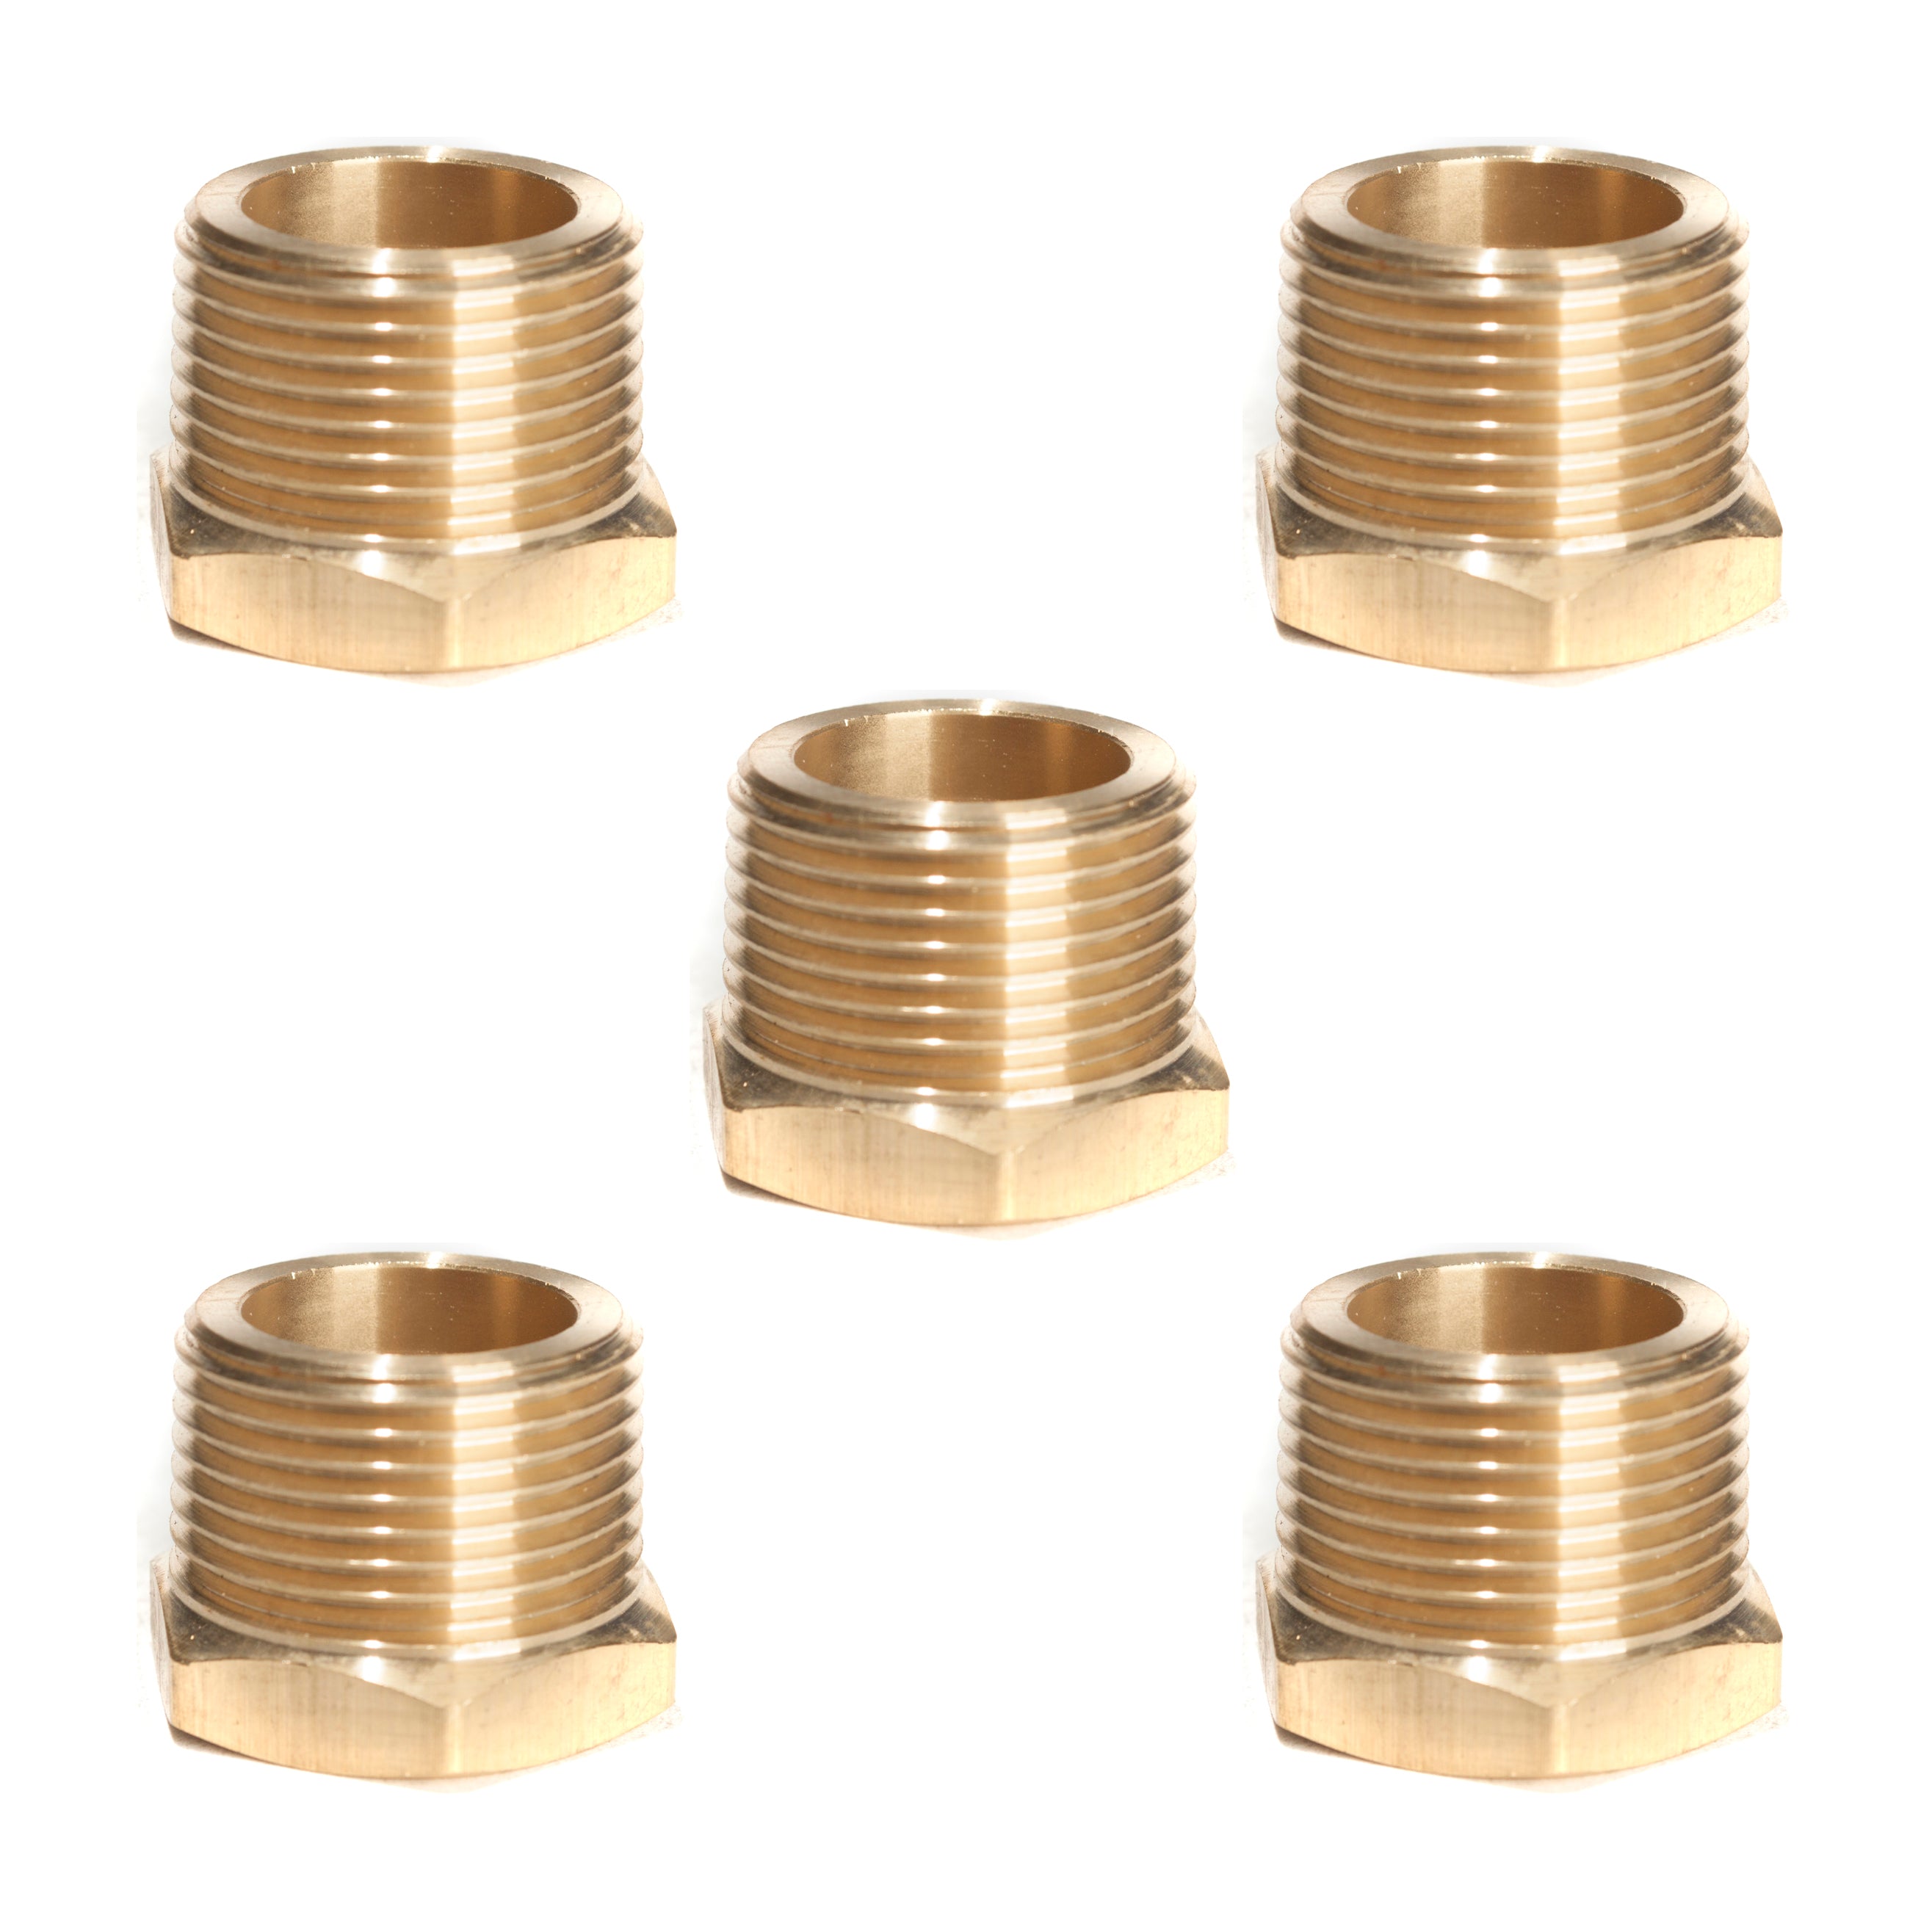 LTWFITTING Lead Free Brass Hex Pipe Bushing Reducer Fittings 1 Inch Male x 3/4 Inch Female NPT (Pack of 5)